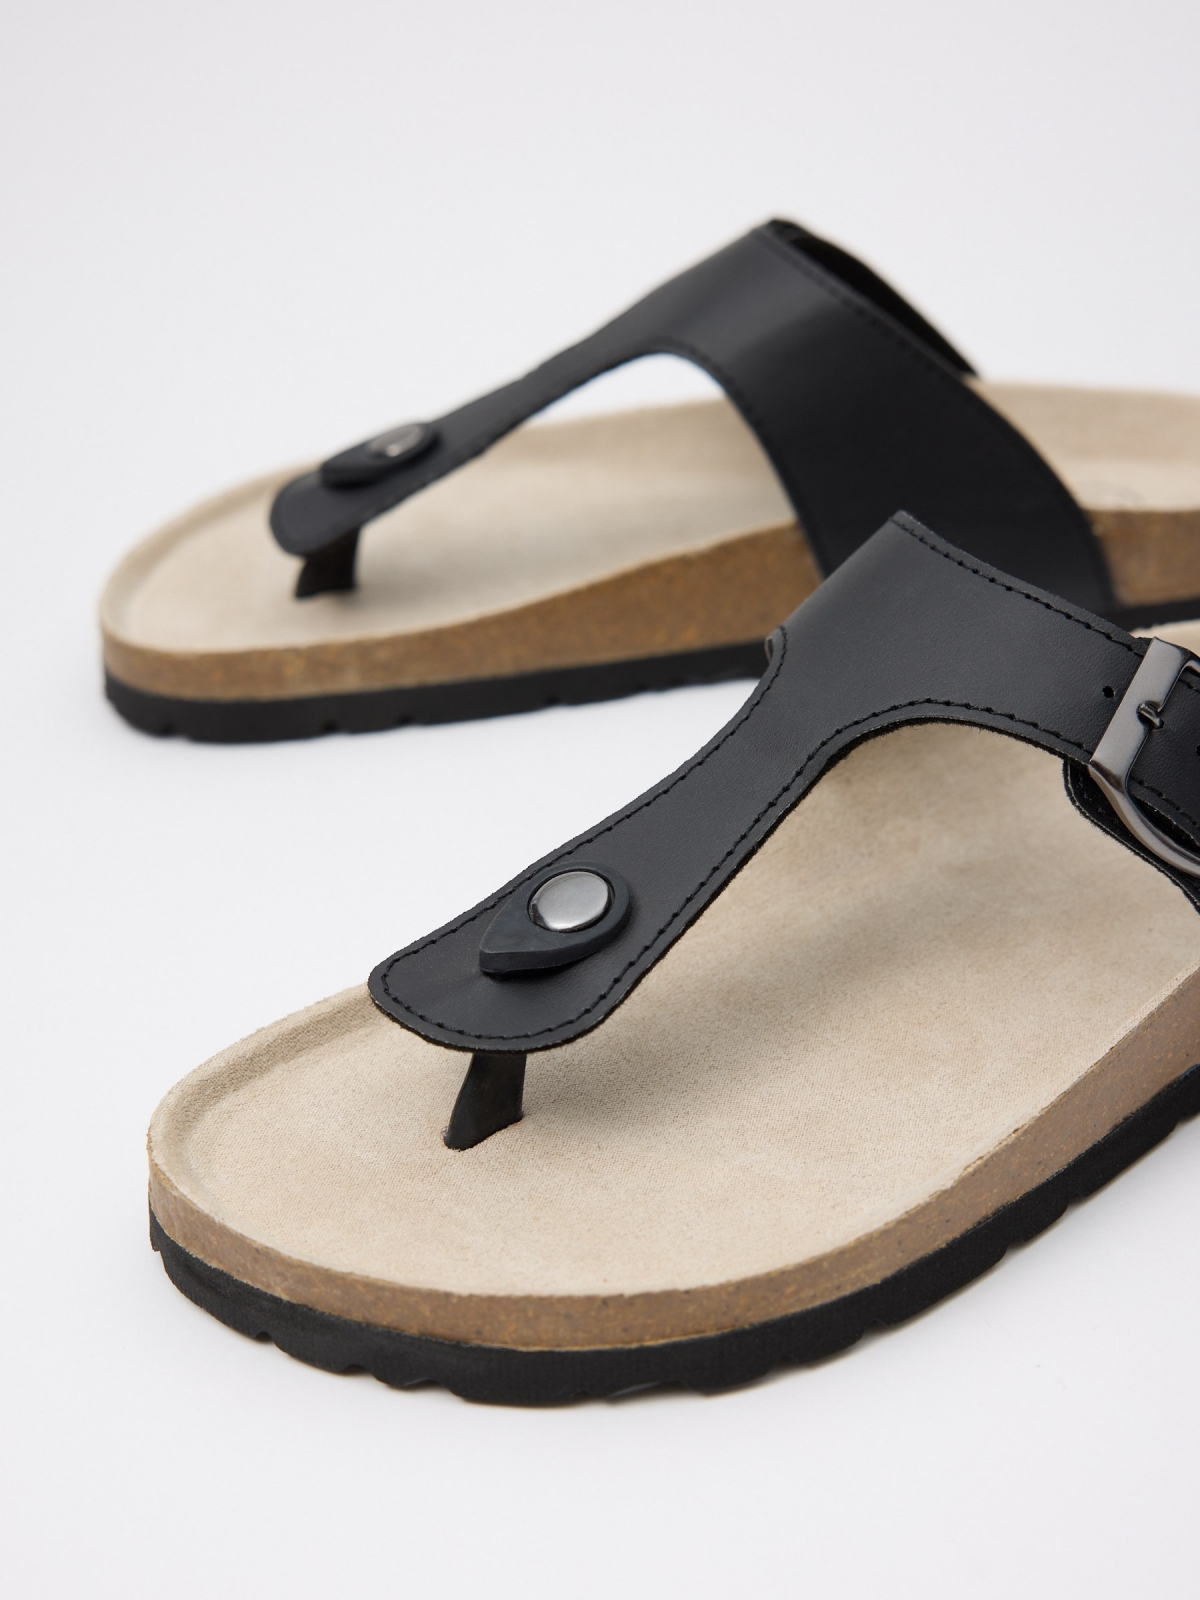 Black sandal with buckle black detail view